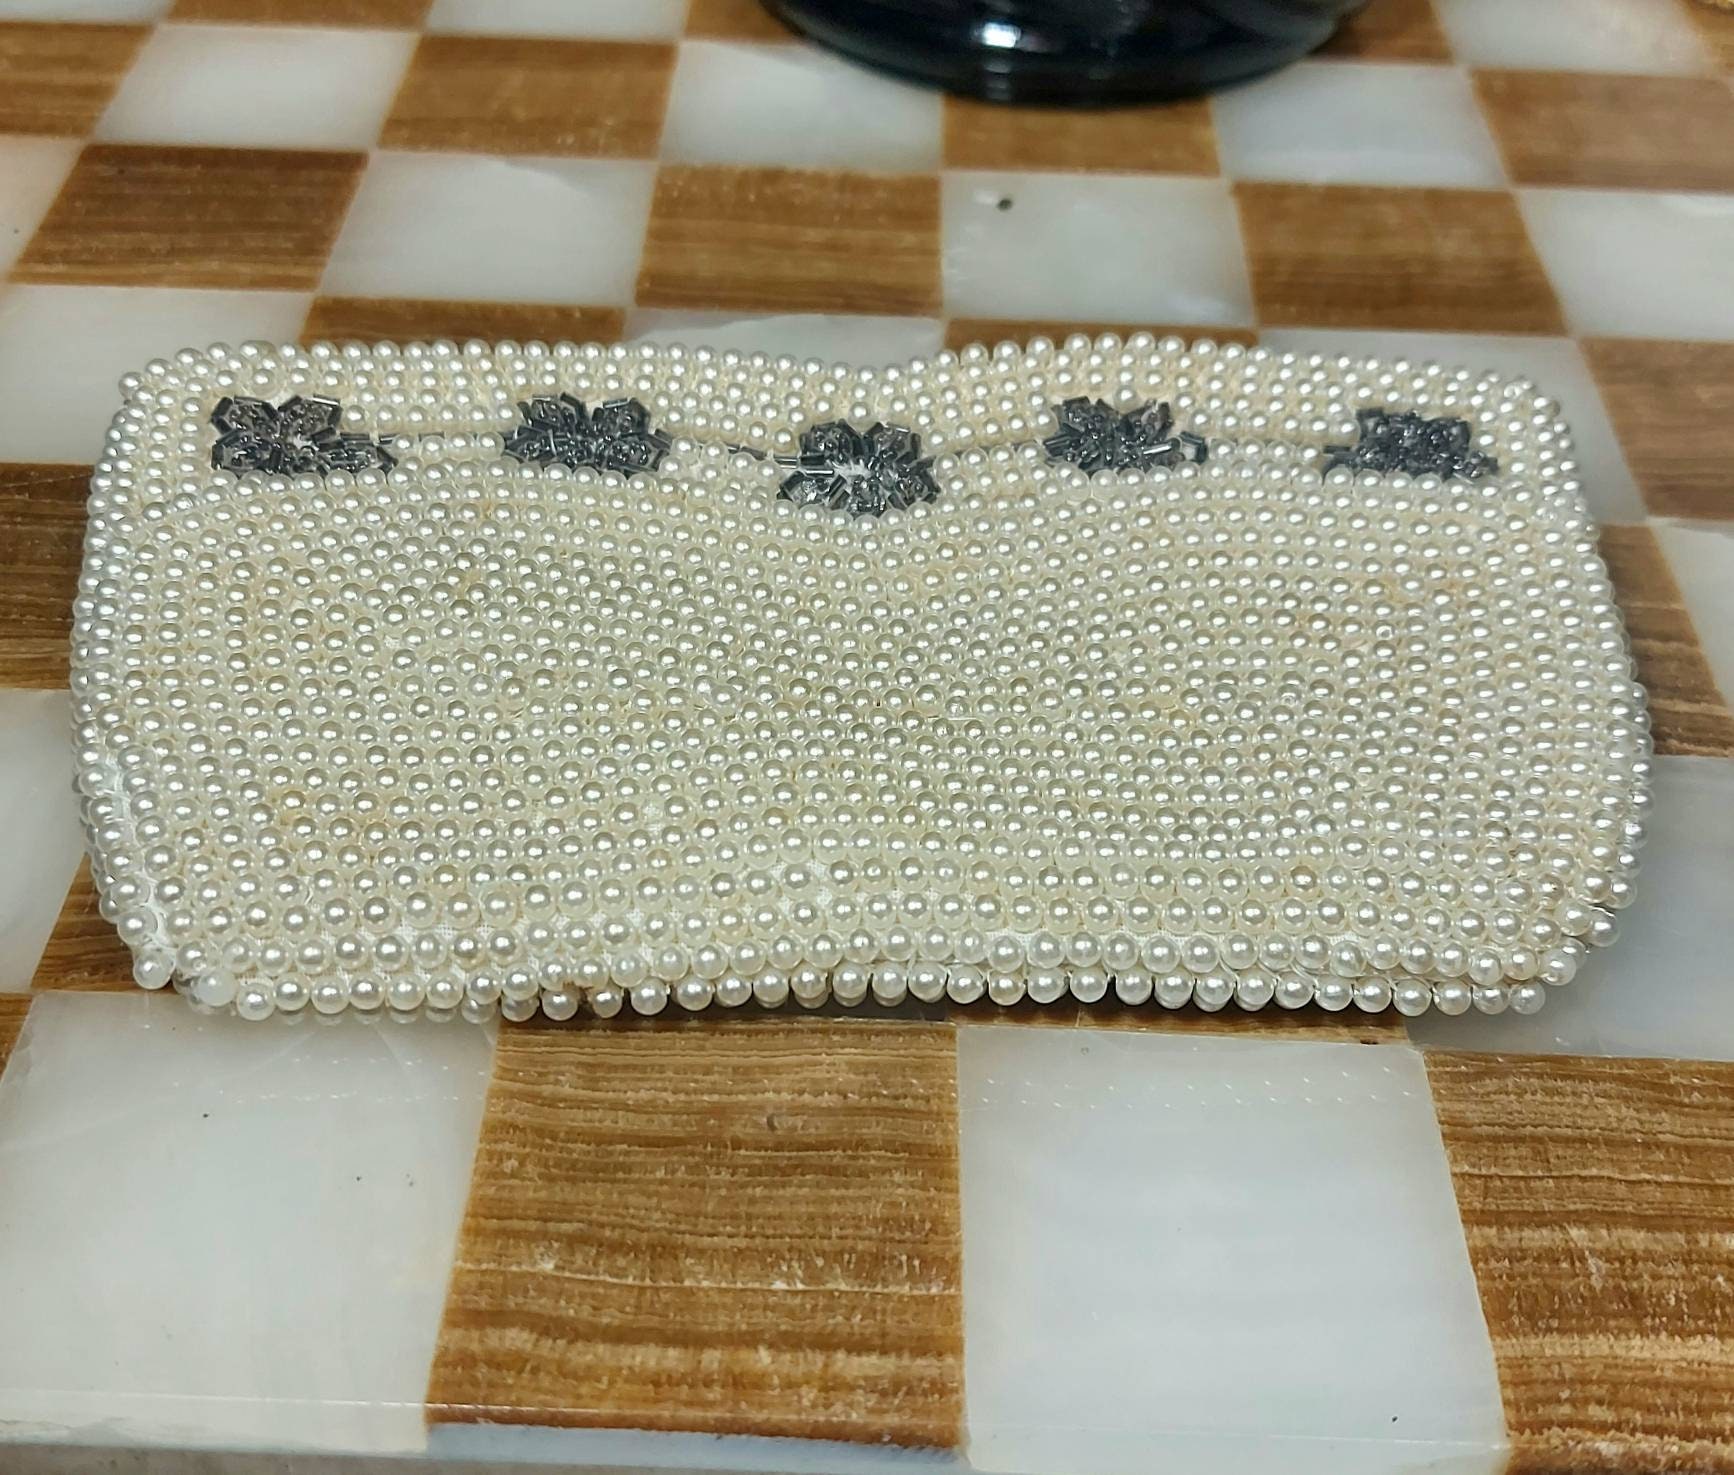 Hand Made Vintage Pearl Beaded Evening Bag